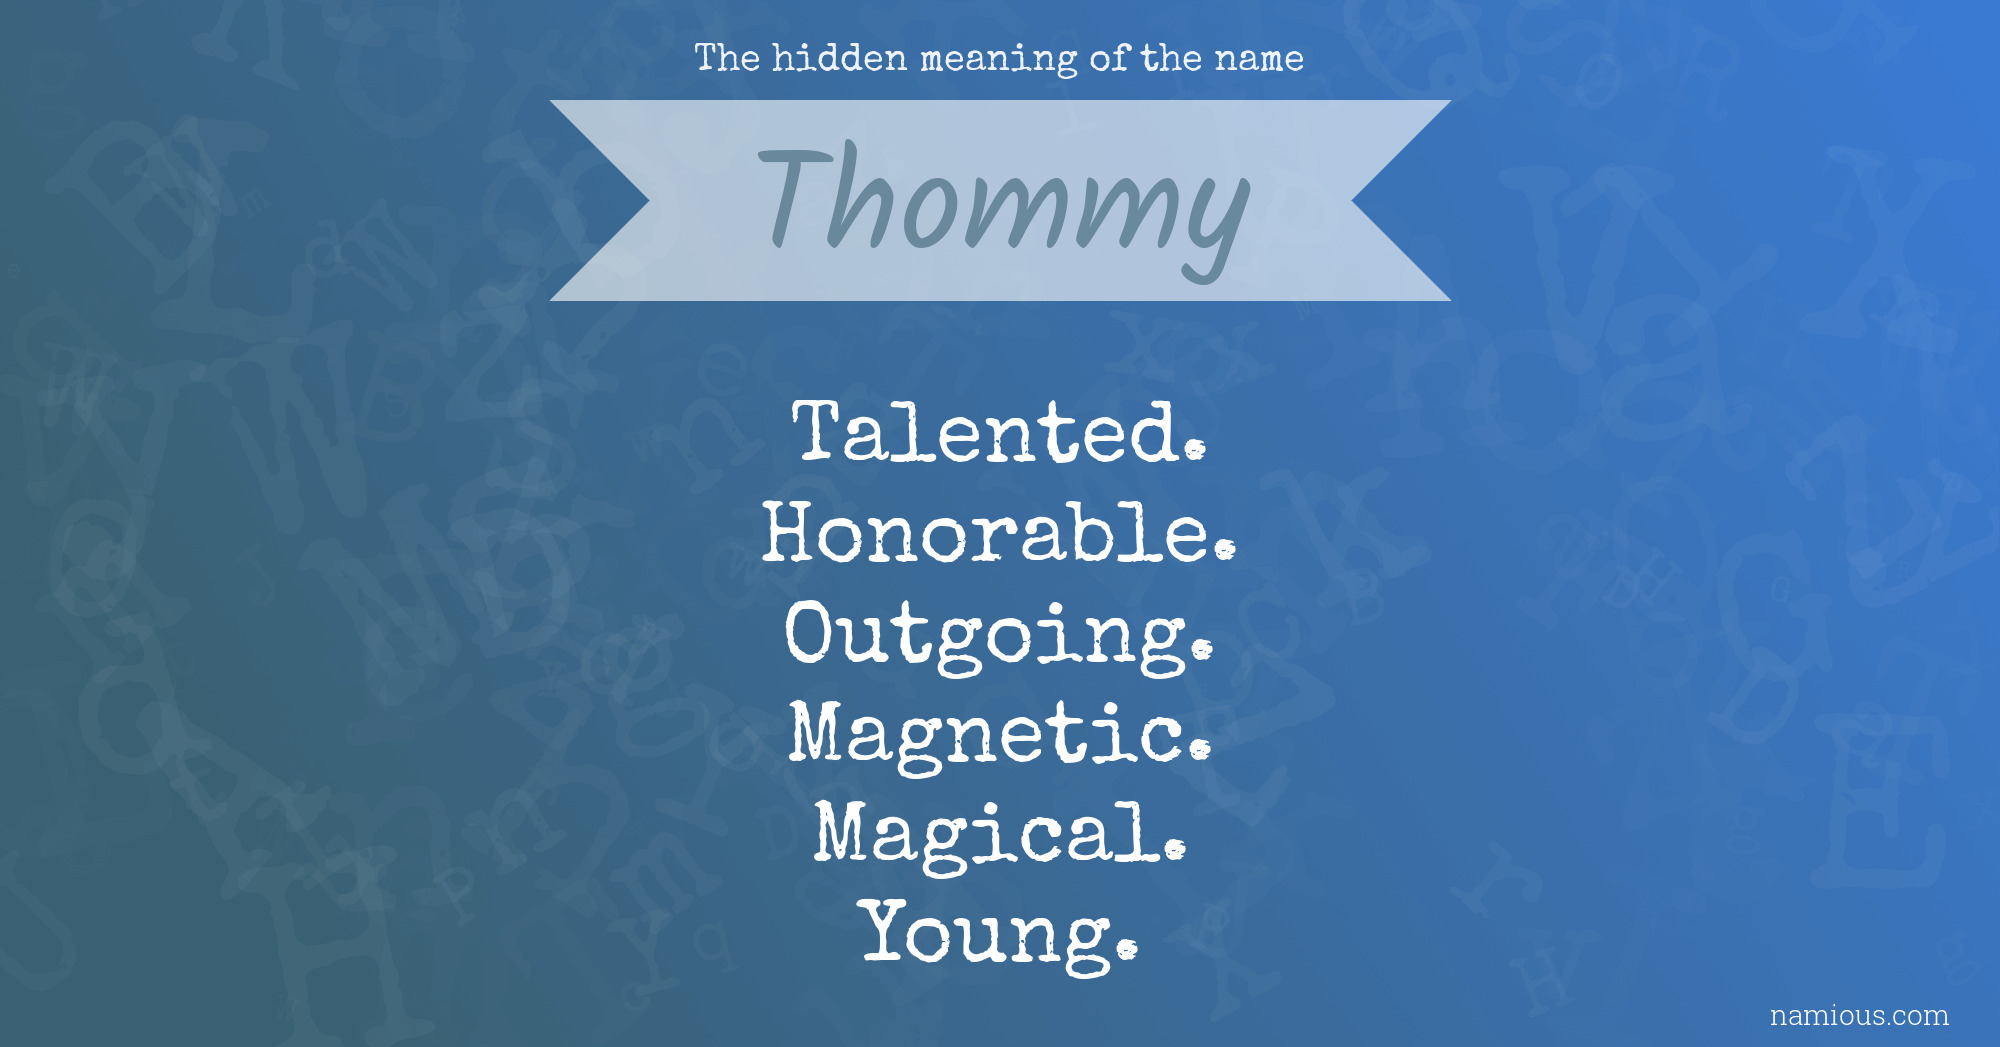 The hidden meaning of the name Thommy